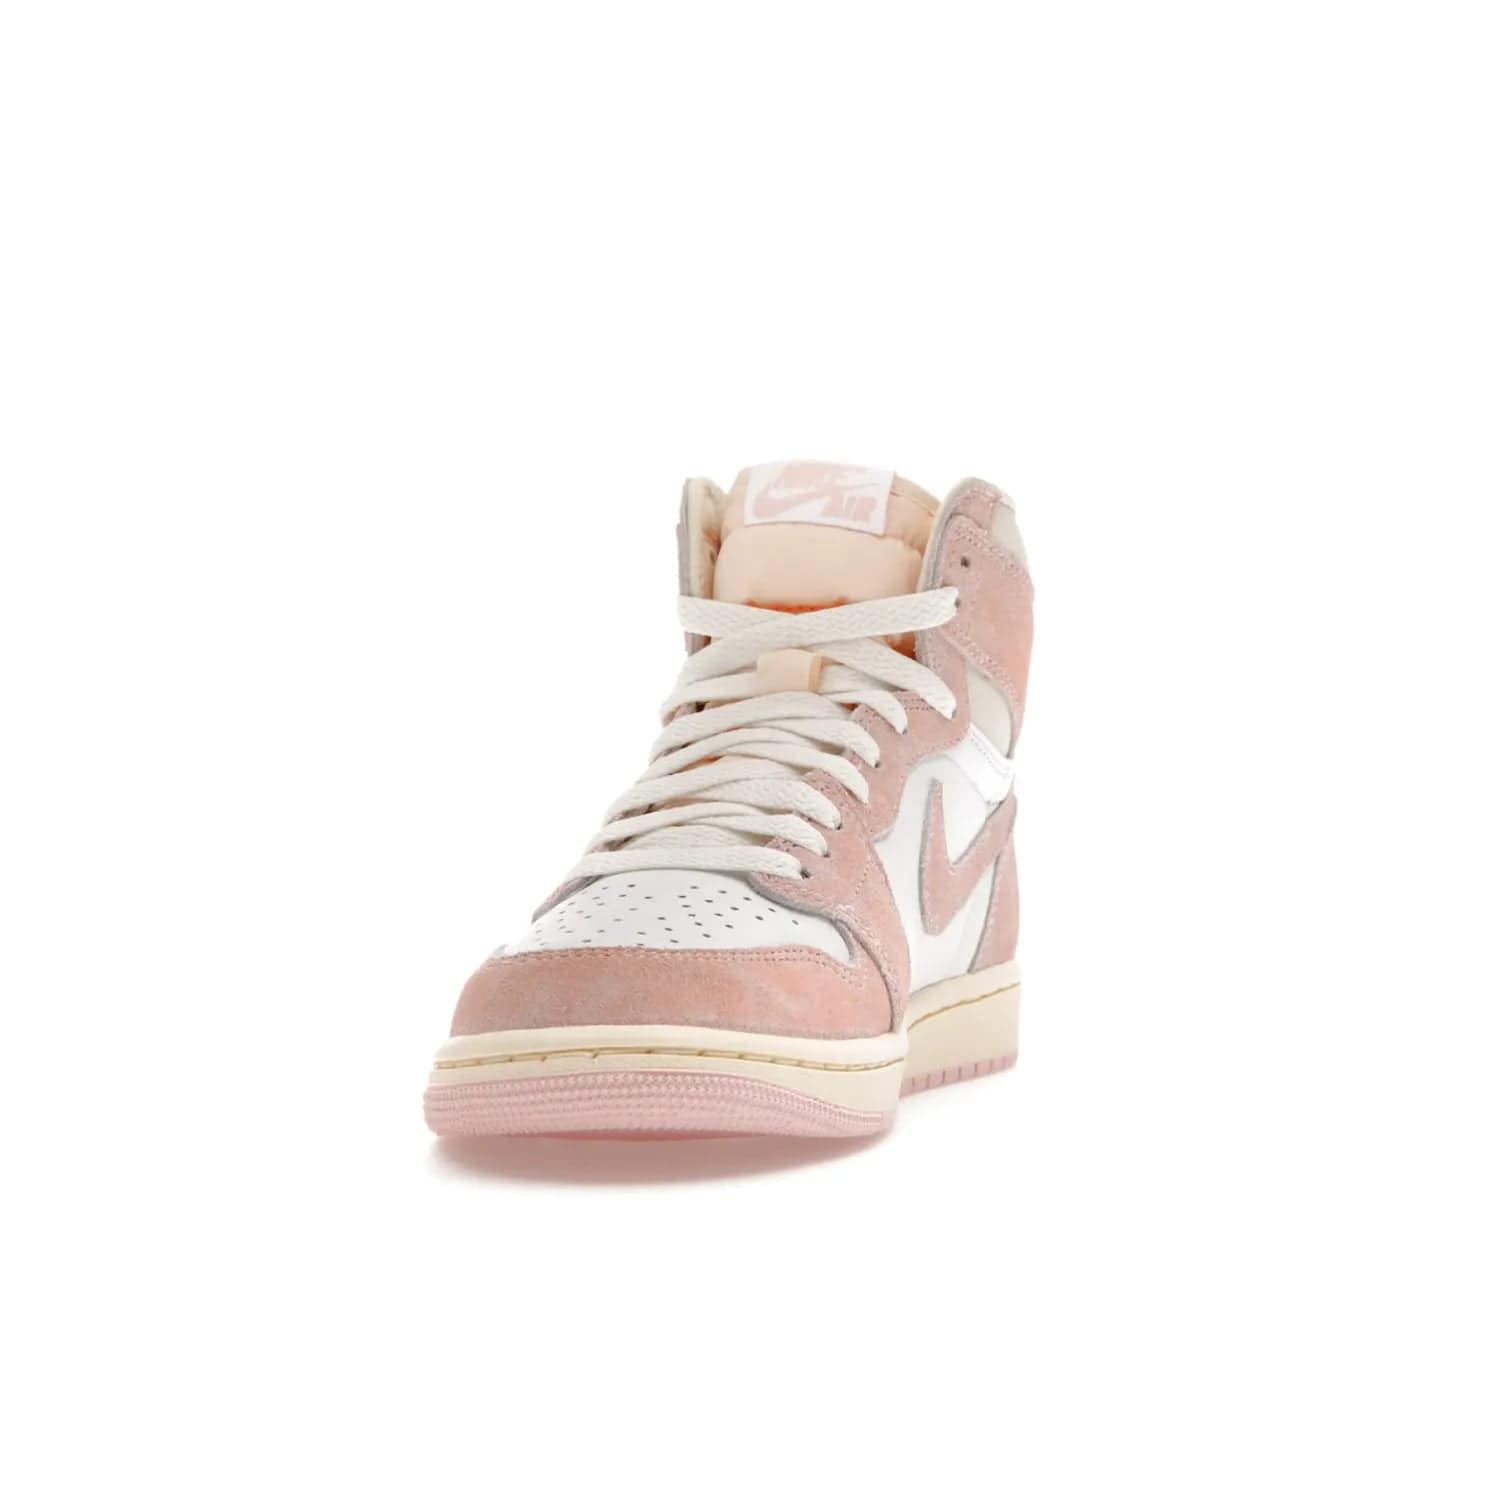 Jordan 1 Retro High OG Washed Pink (Women's) - Image 12 - Only at www.BallersClubKickz.com - Iconic Air Jordan 1 Retro High OG for women with unique pink suede and white leather uppers. Get the timeless look on April 22, 2023.